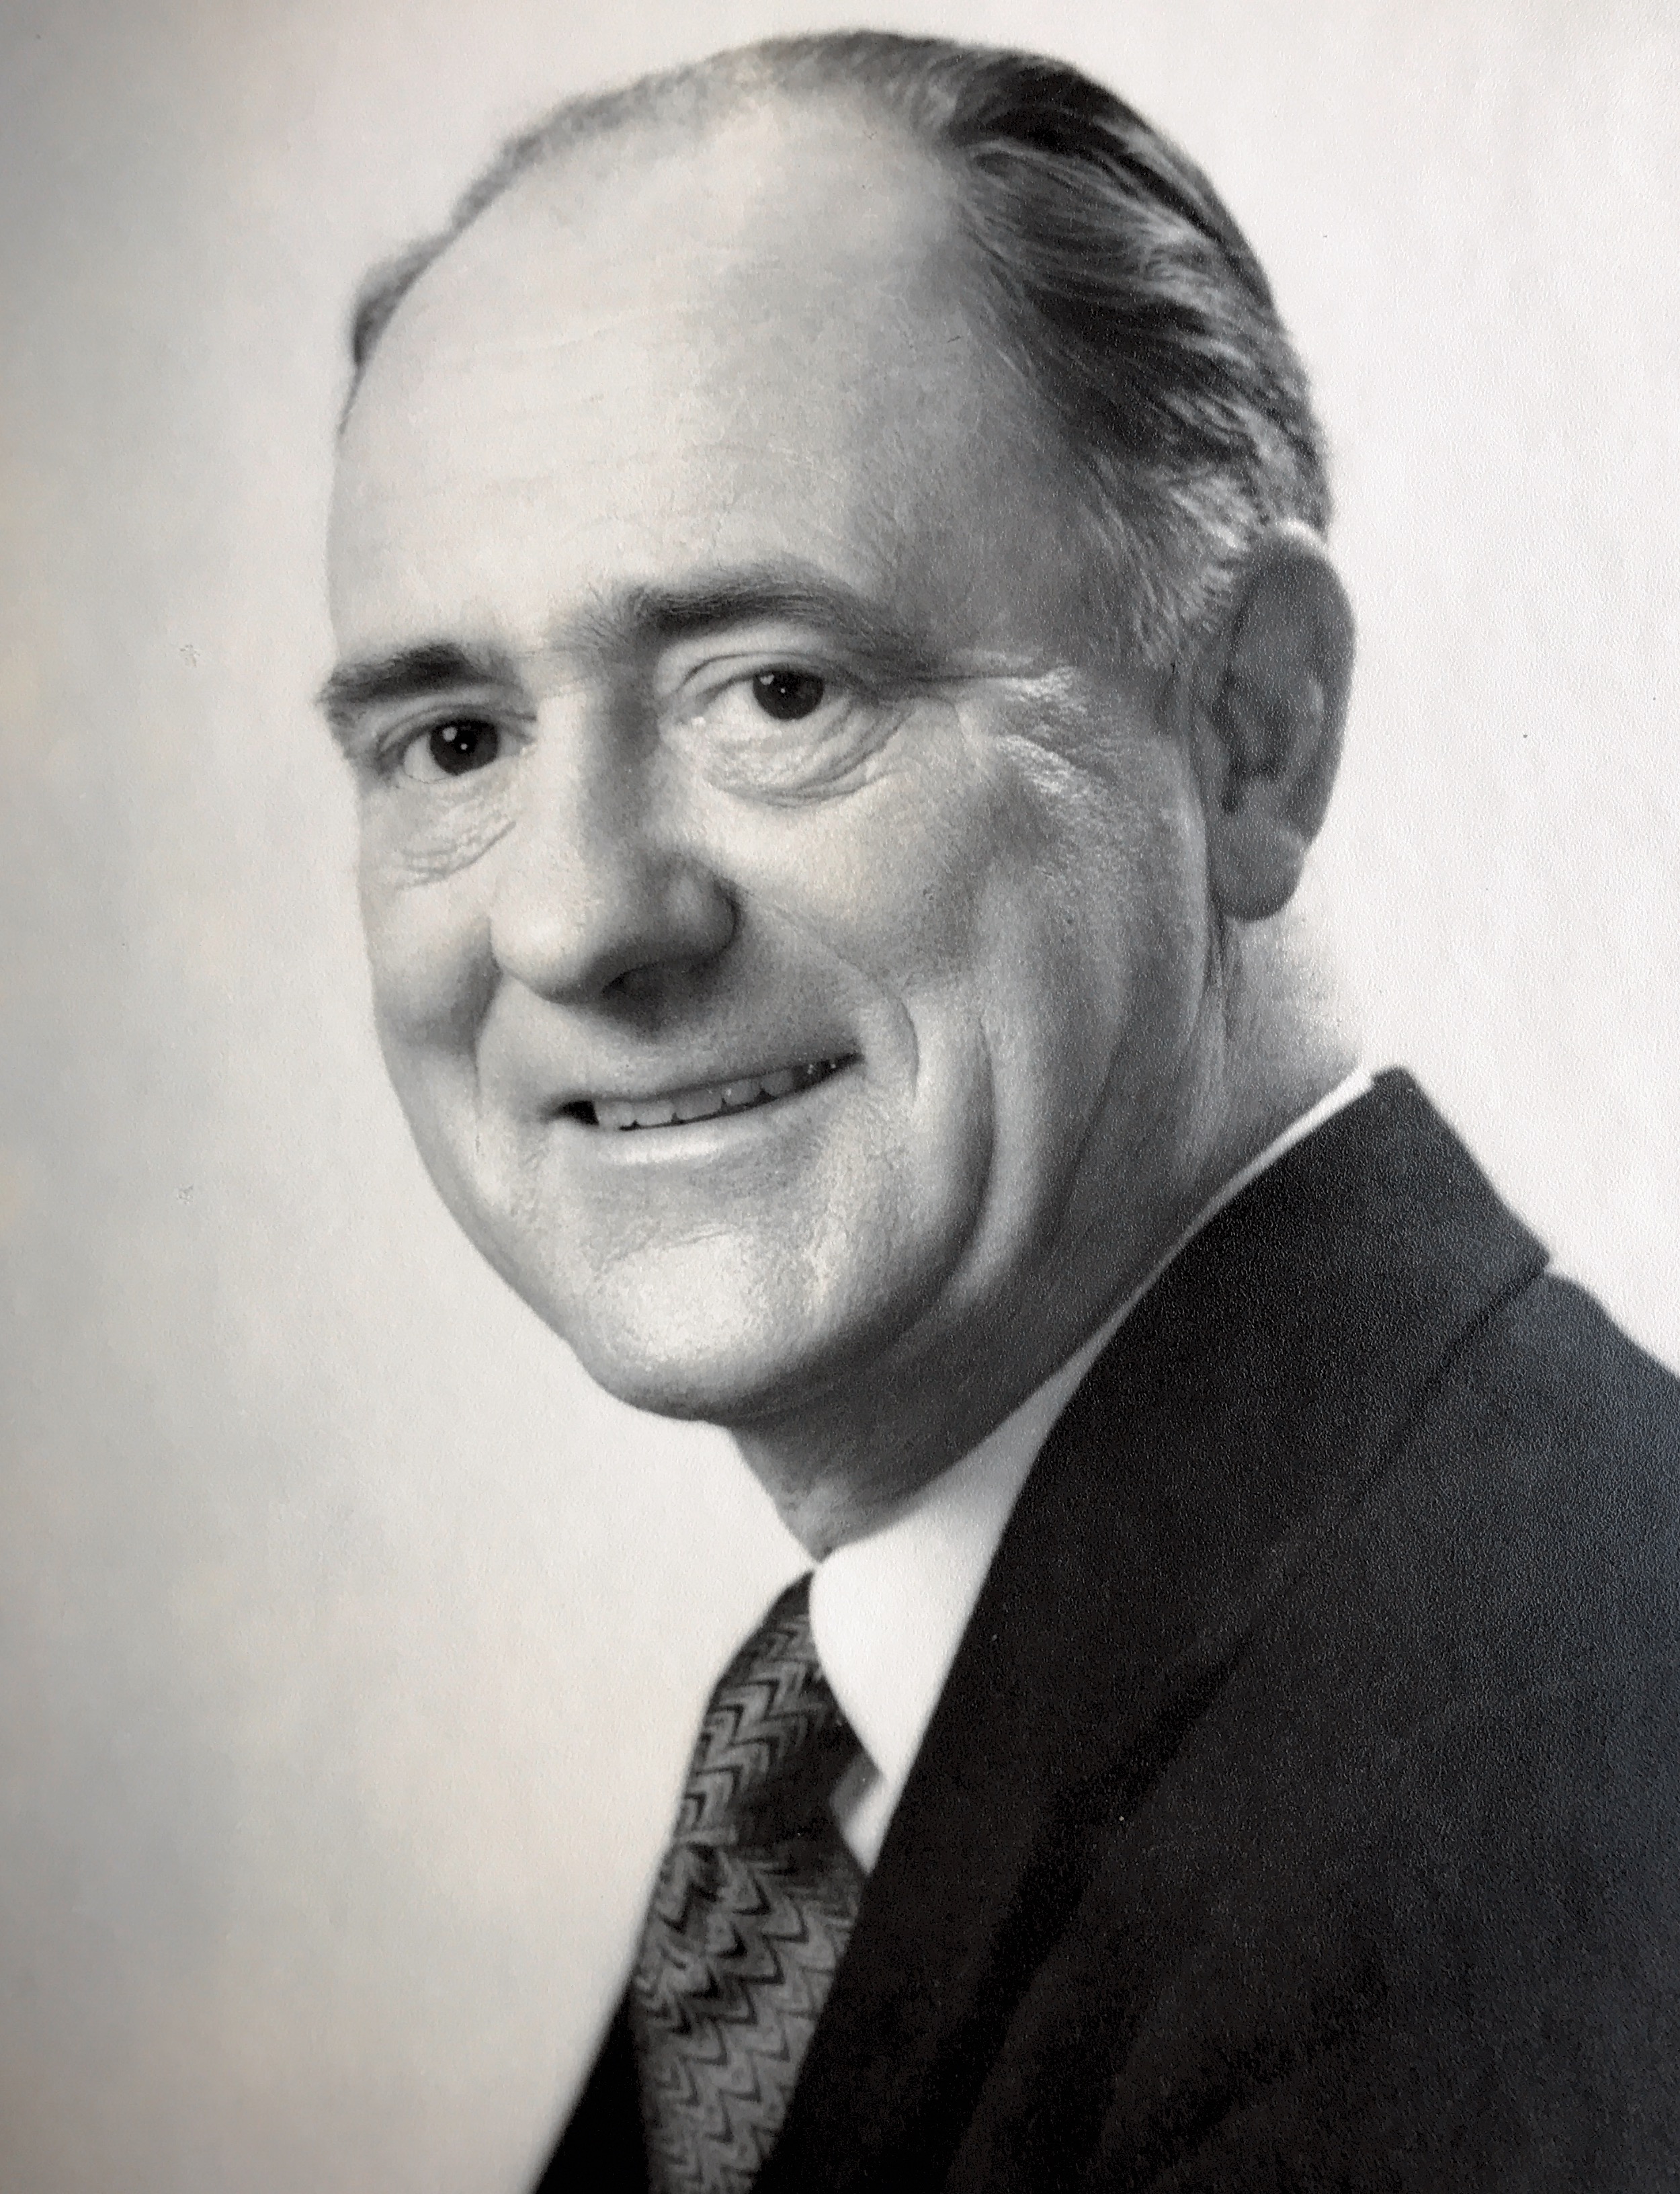 Eric Edward Nansett
Retired from NZ Post and Telegraph Department as Divisional Director in 1959